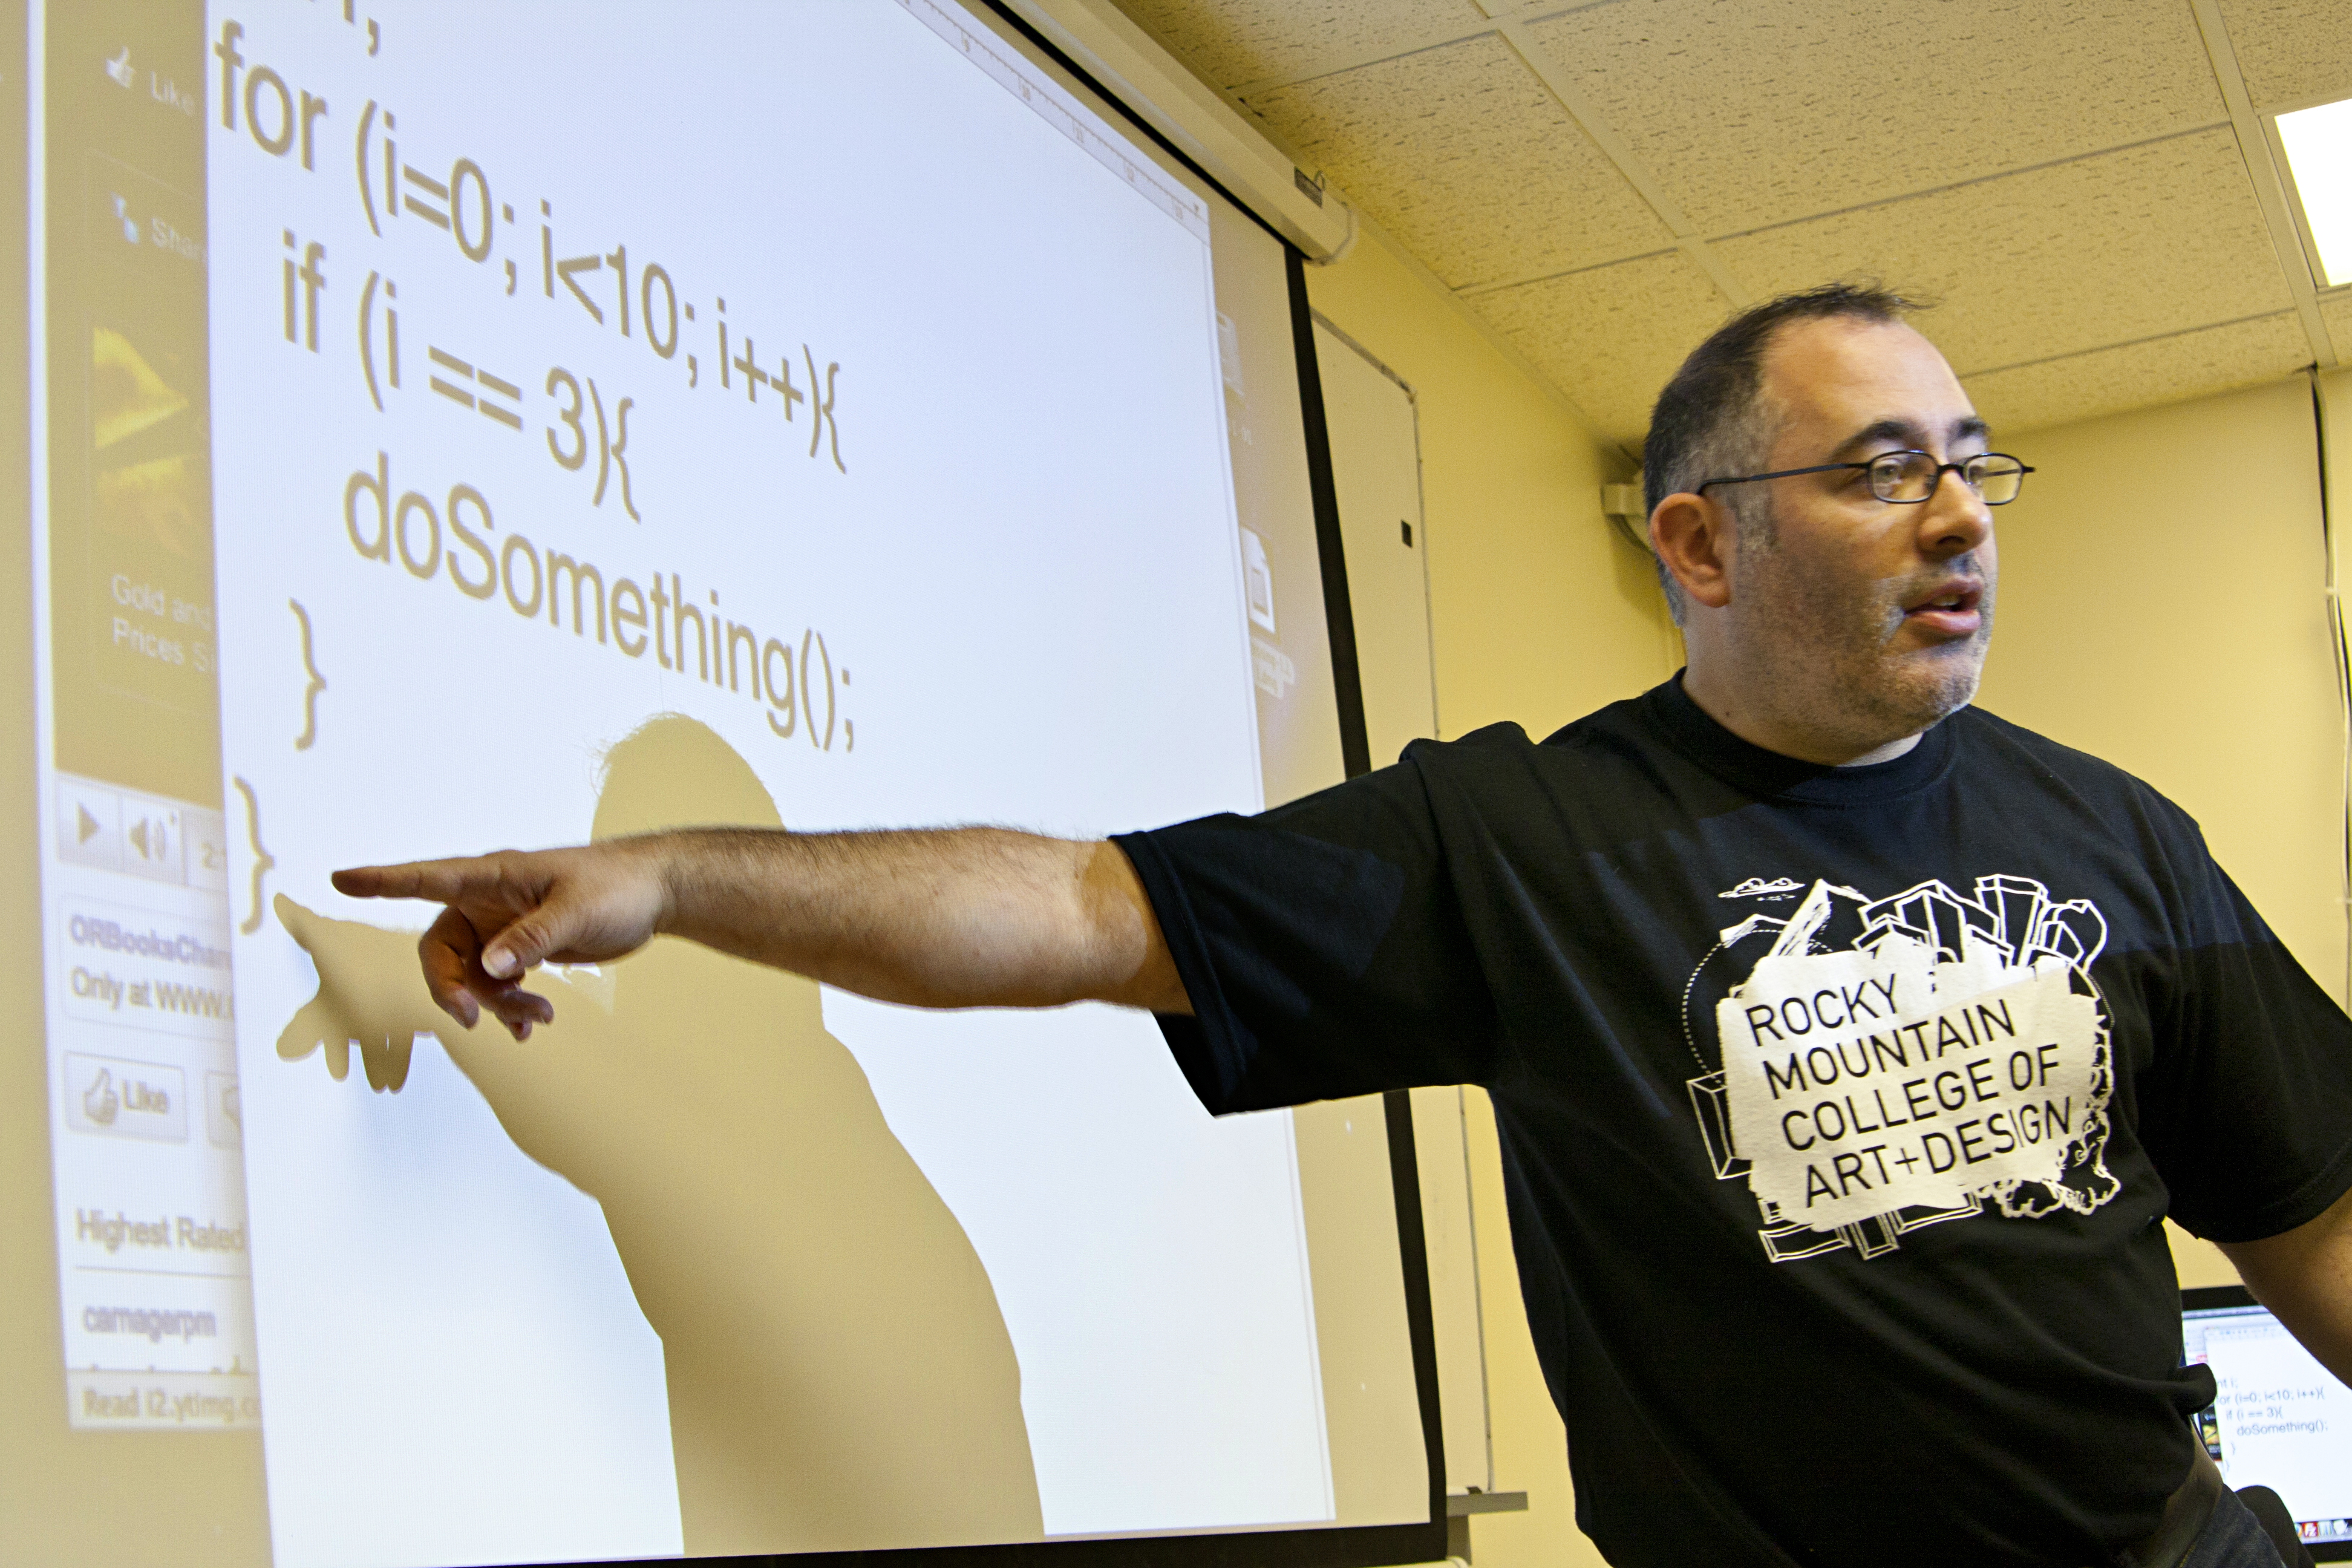 An image of a man pointing to a video lecture